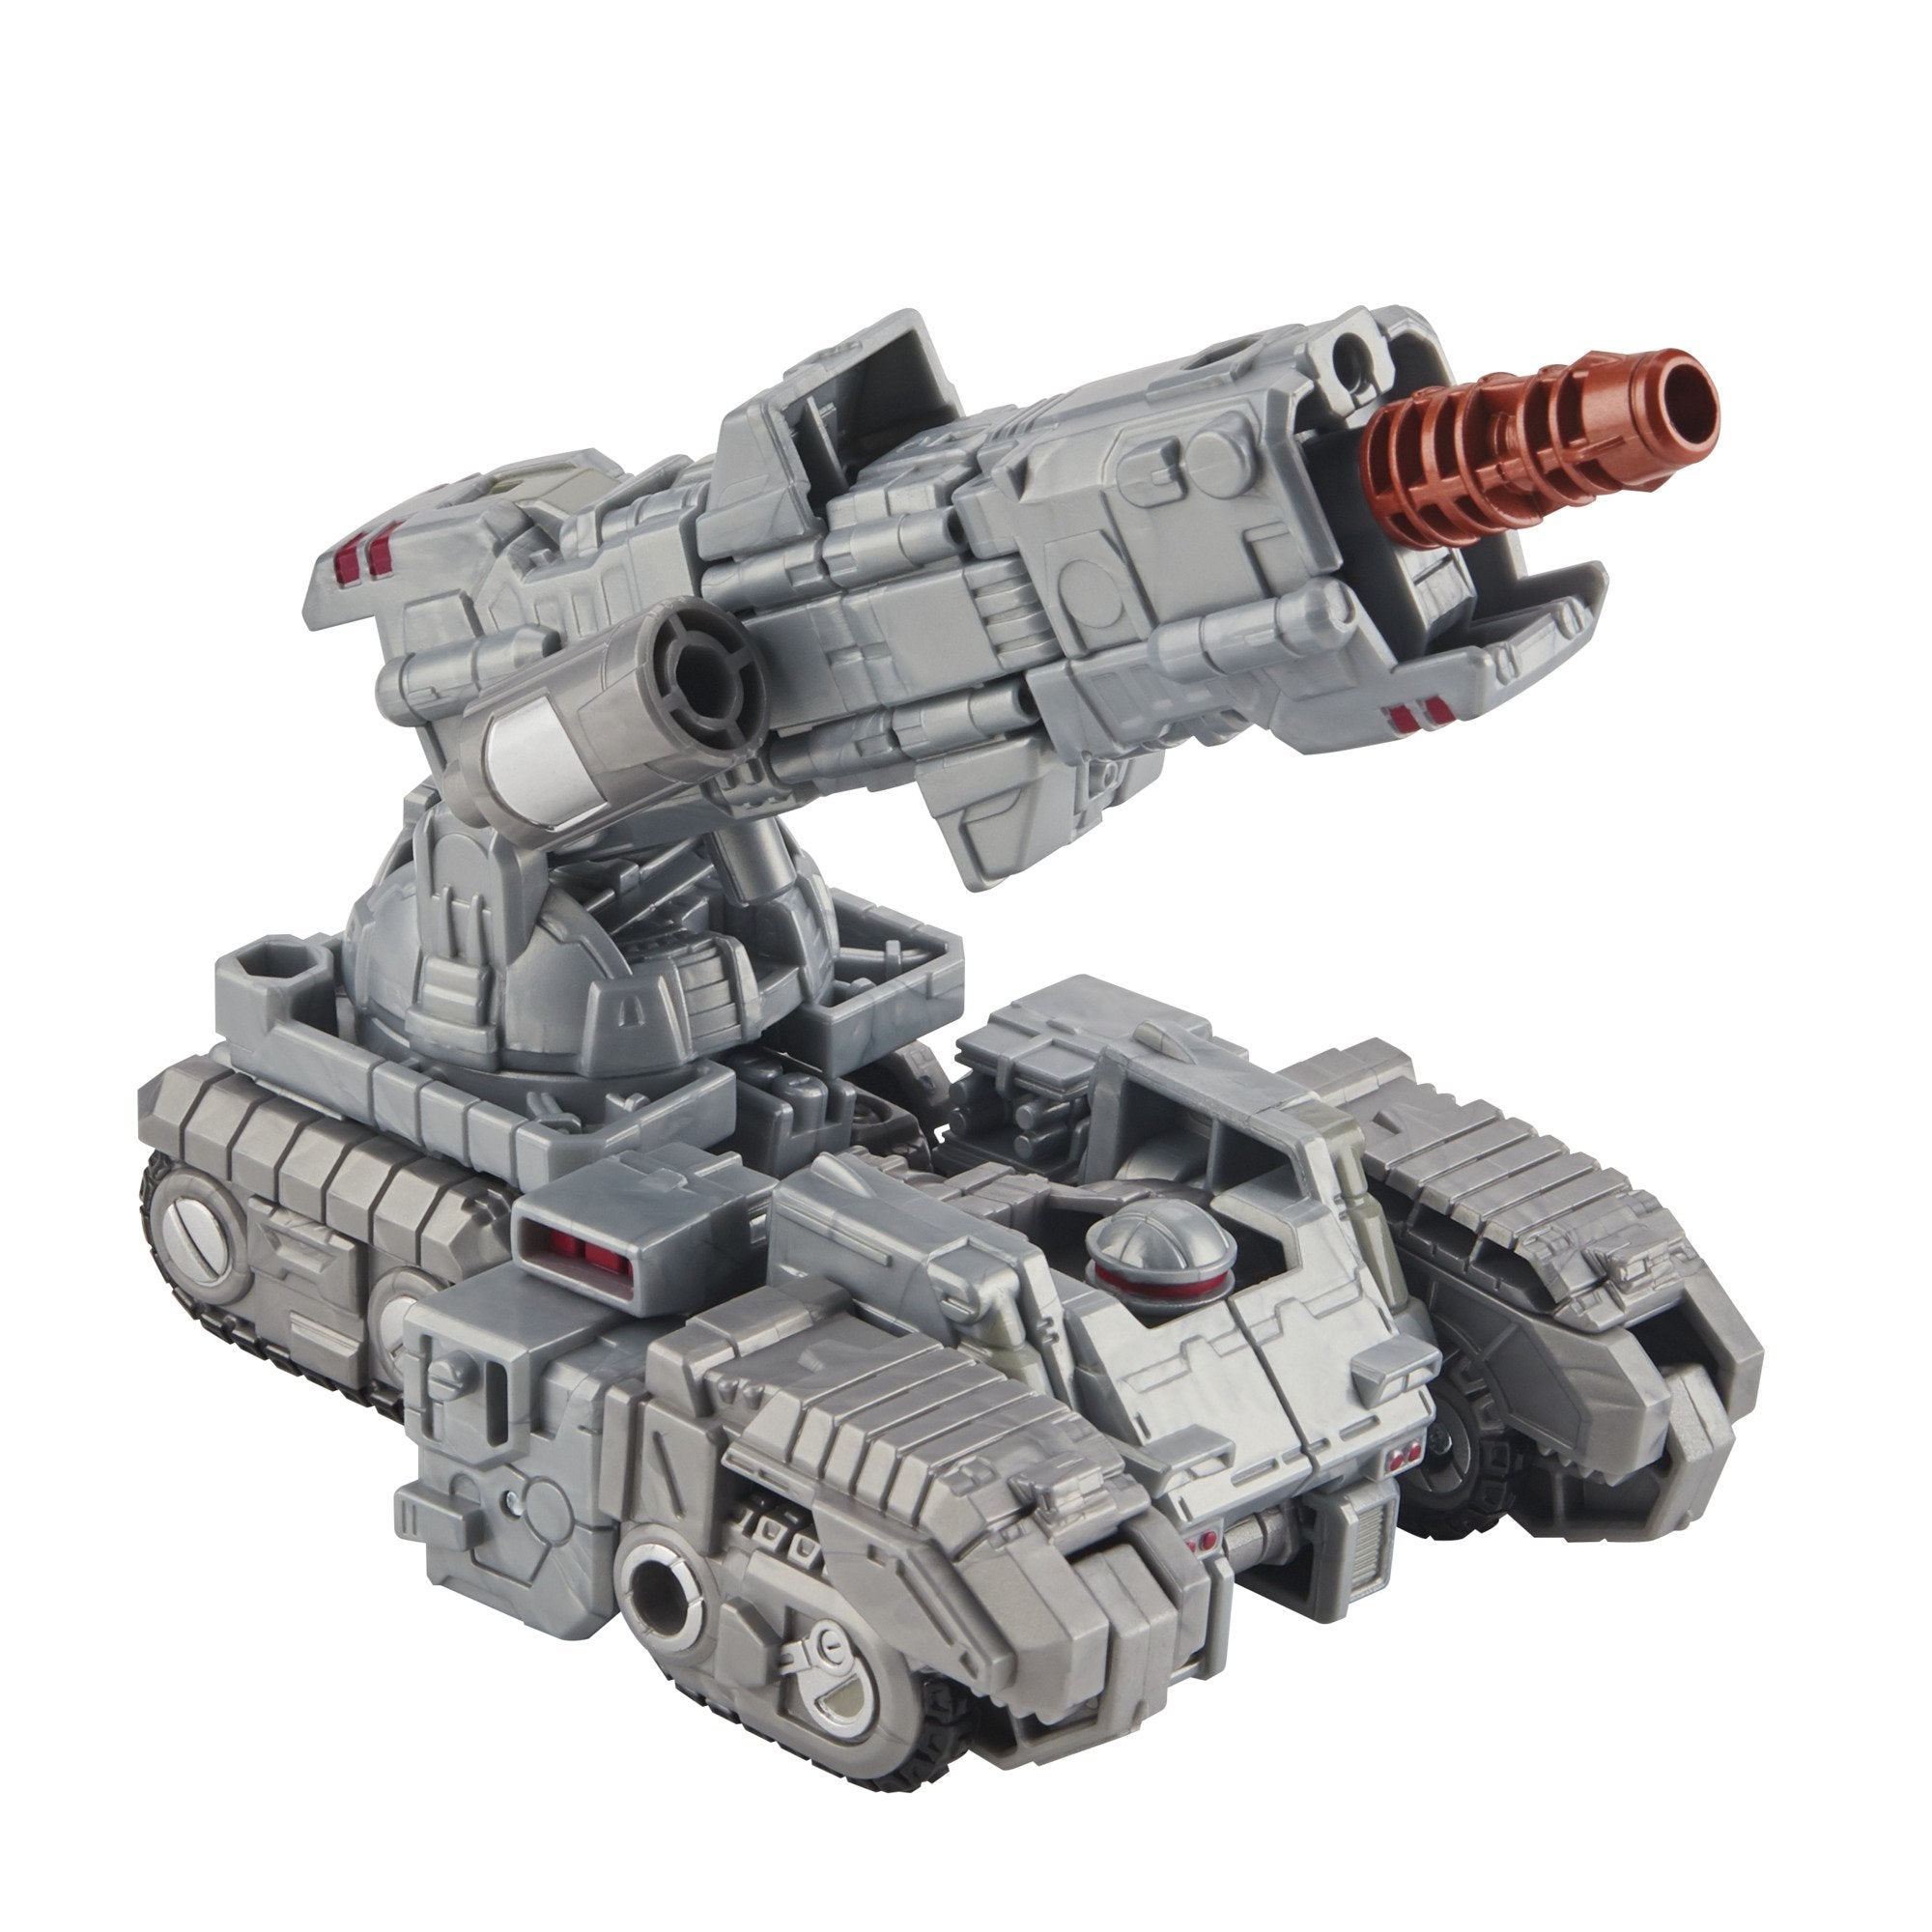 Hasbro - Transformers Generations - War for Cybertron - Deluxe Centurion Drone Weaponizer Pack